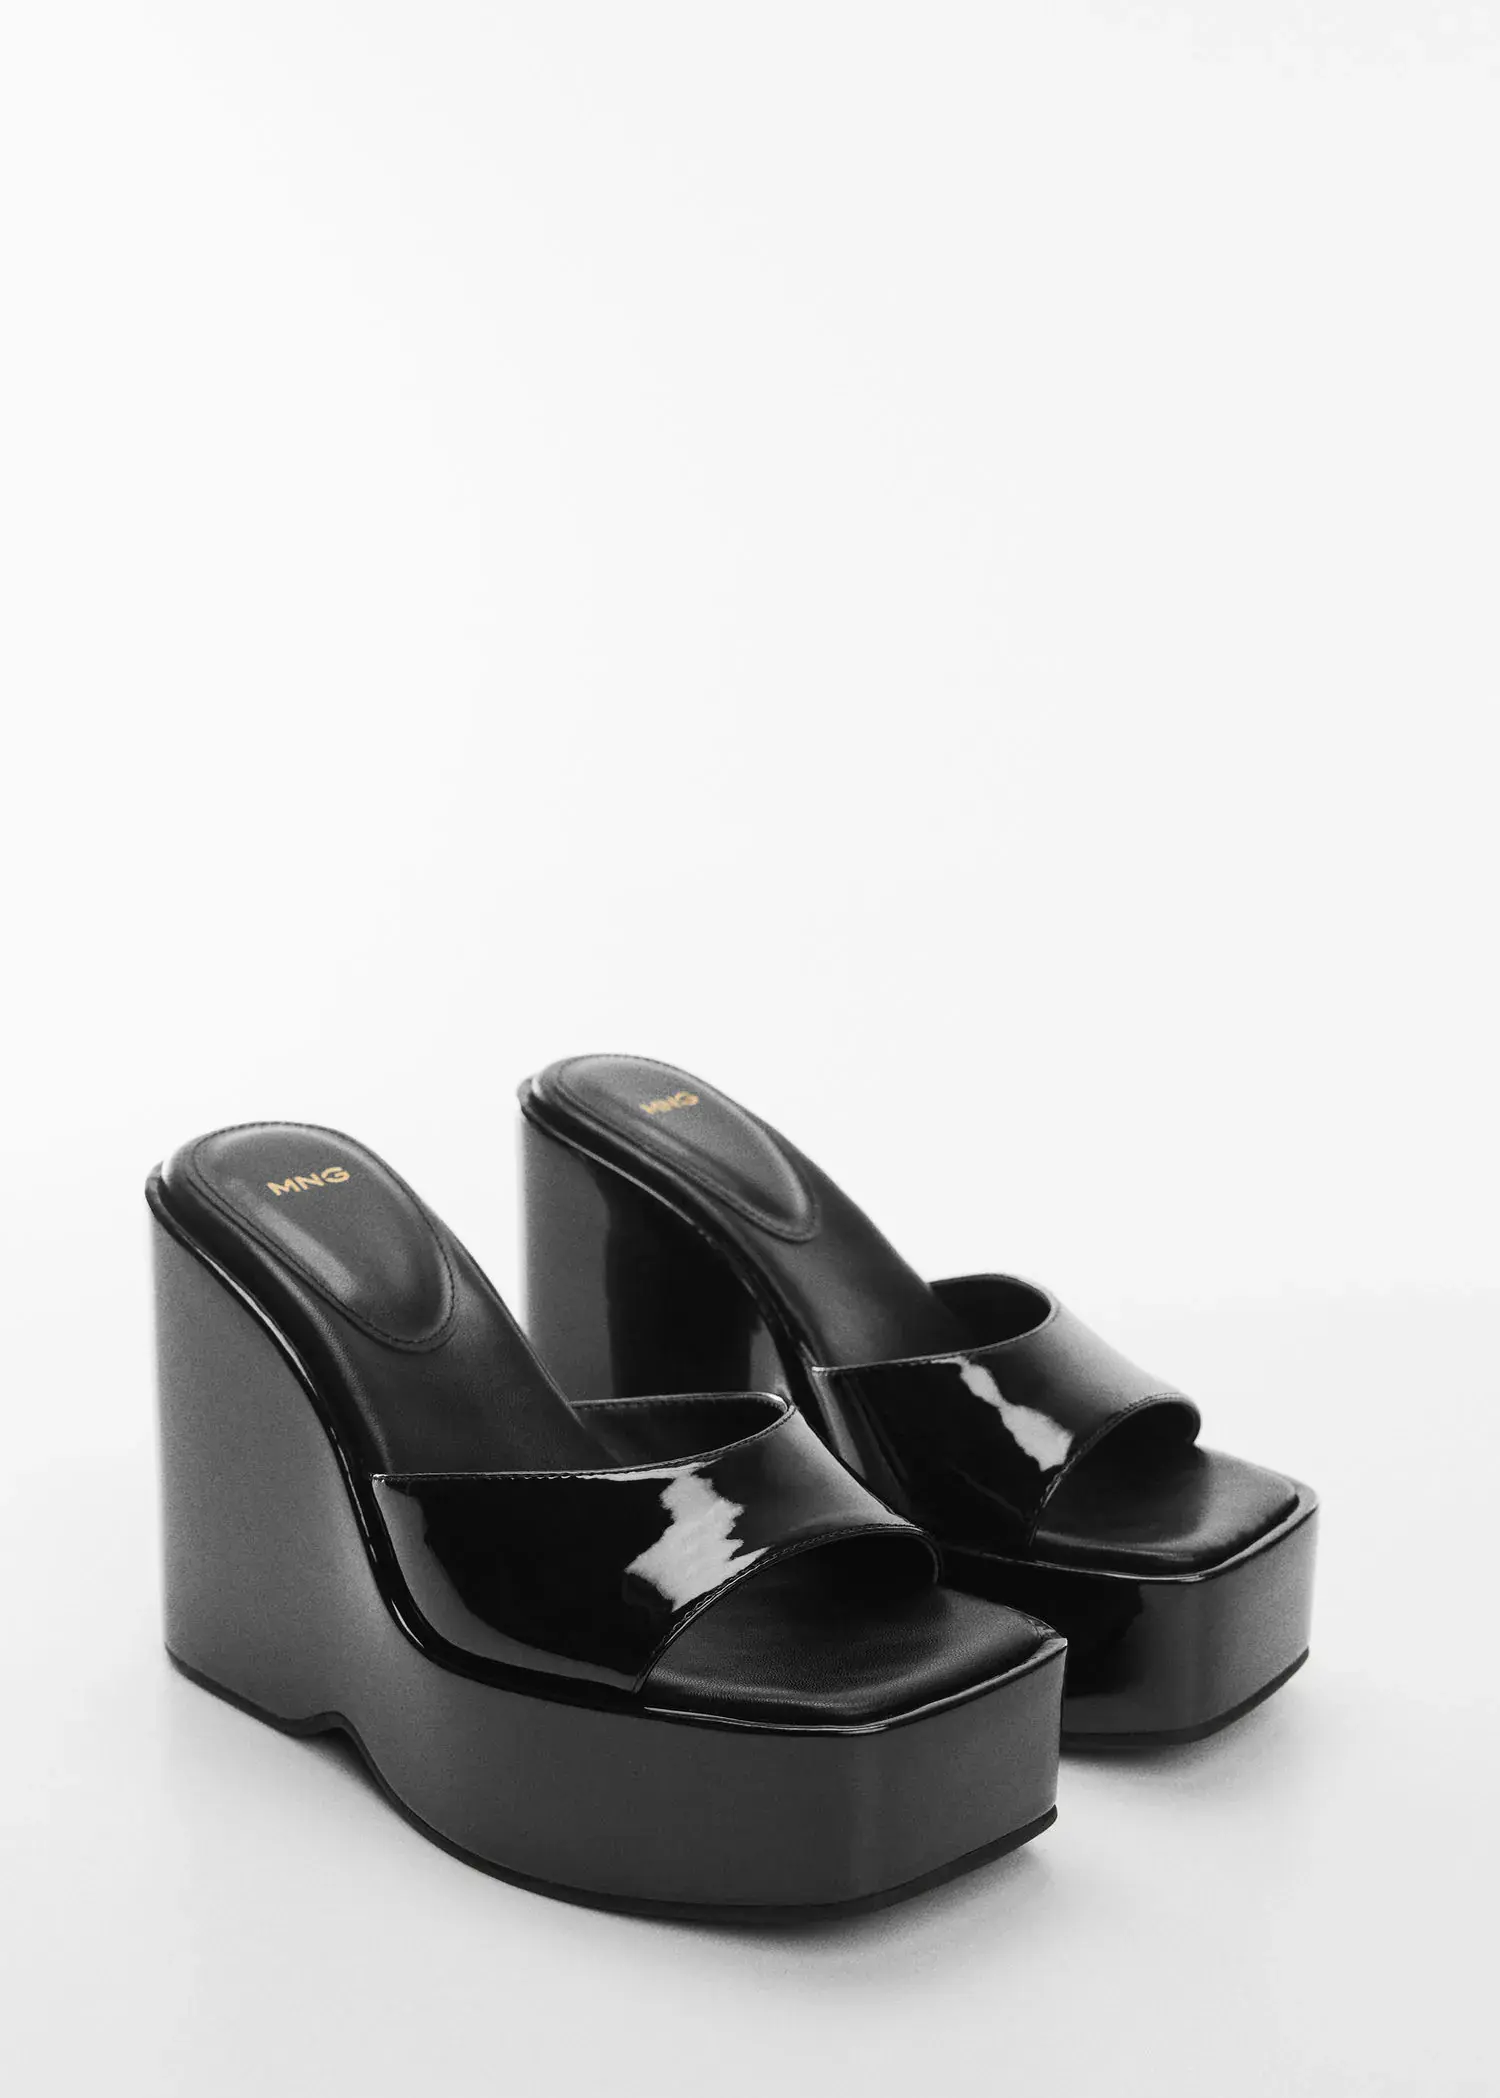 Mango Patent leather-effect platform sandals. a pair of black wedges on a white surface. 